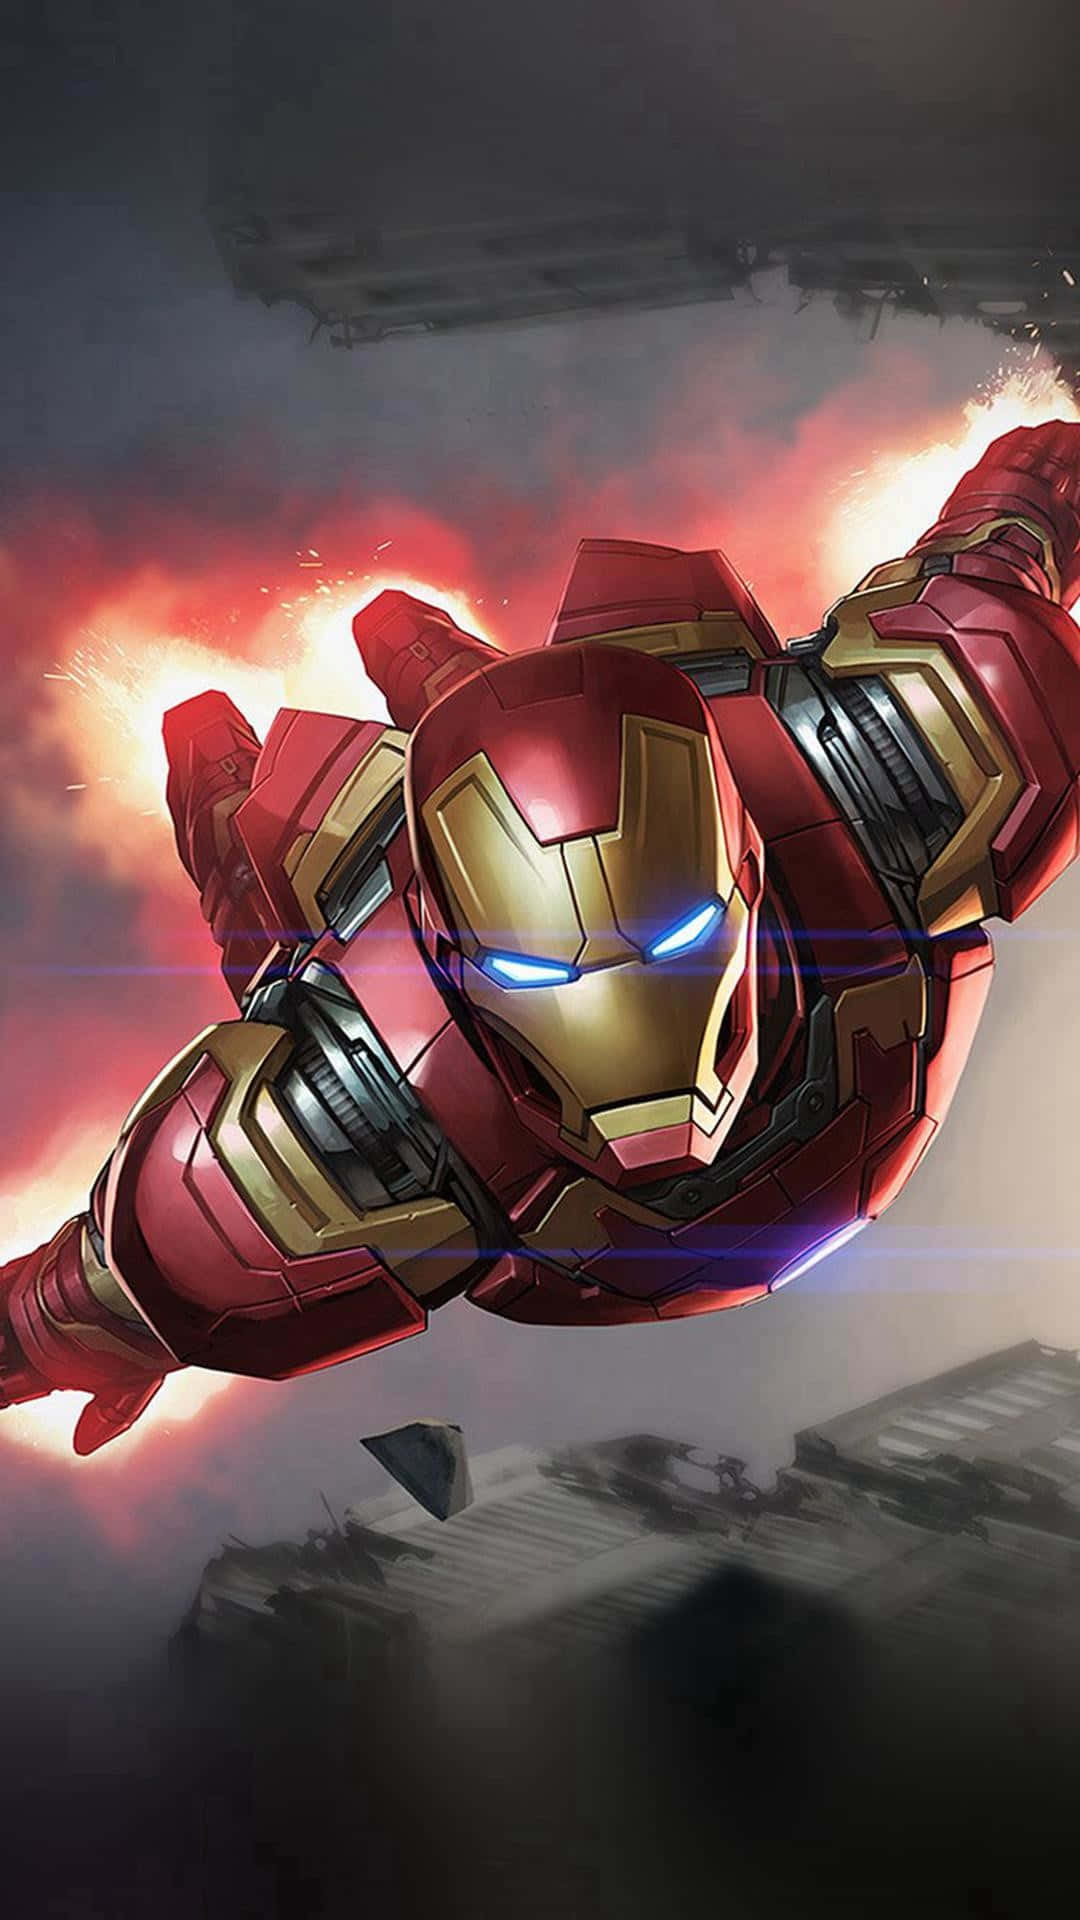 Upgrade your iPhone with this awesome Cool Iron Man wallpaper. Wallpaper